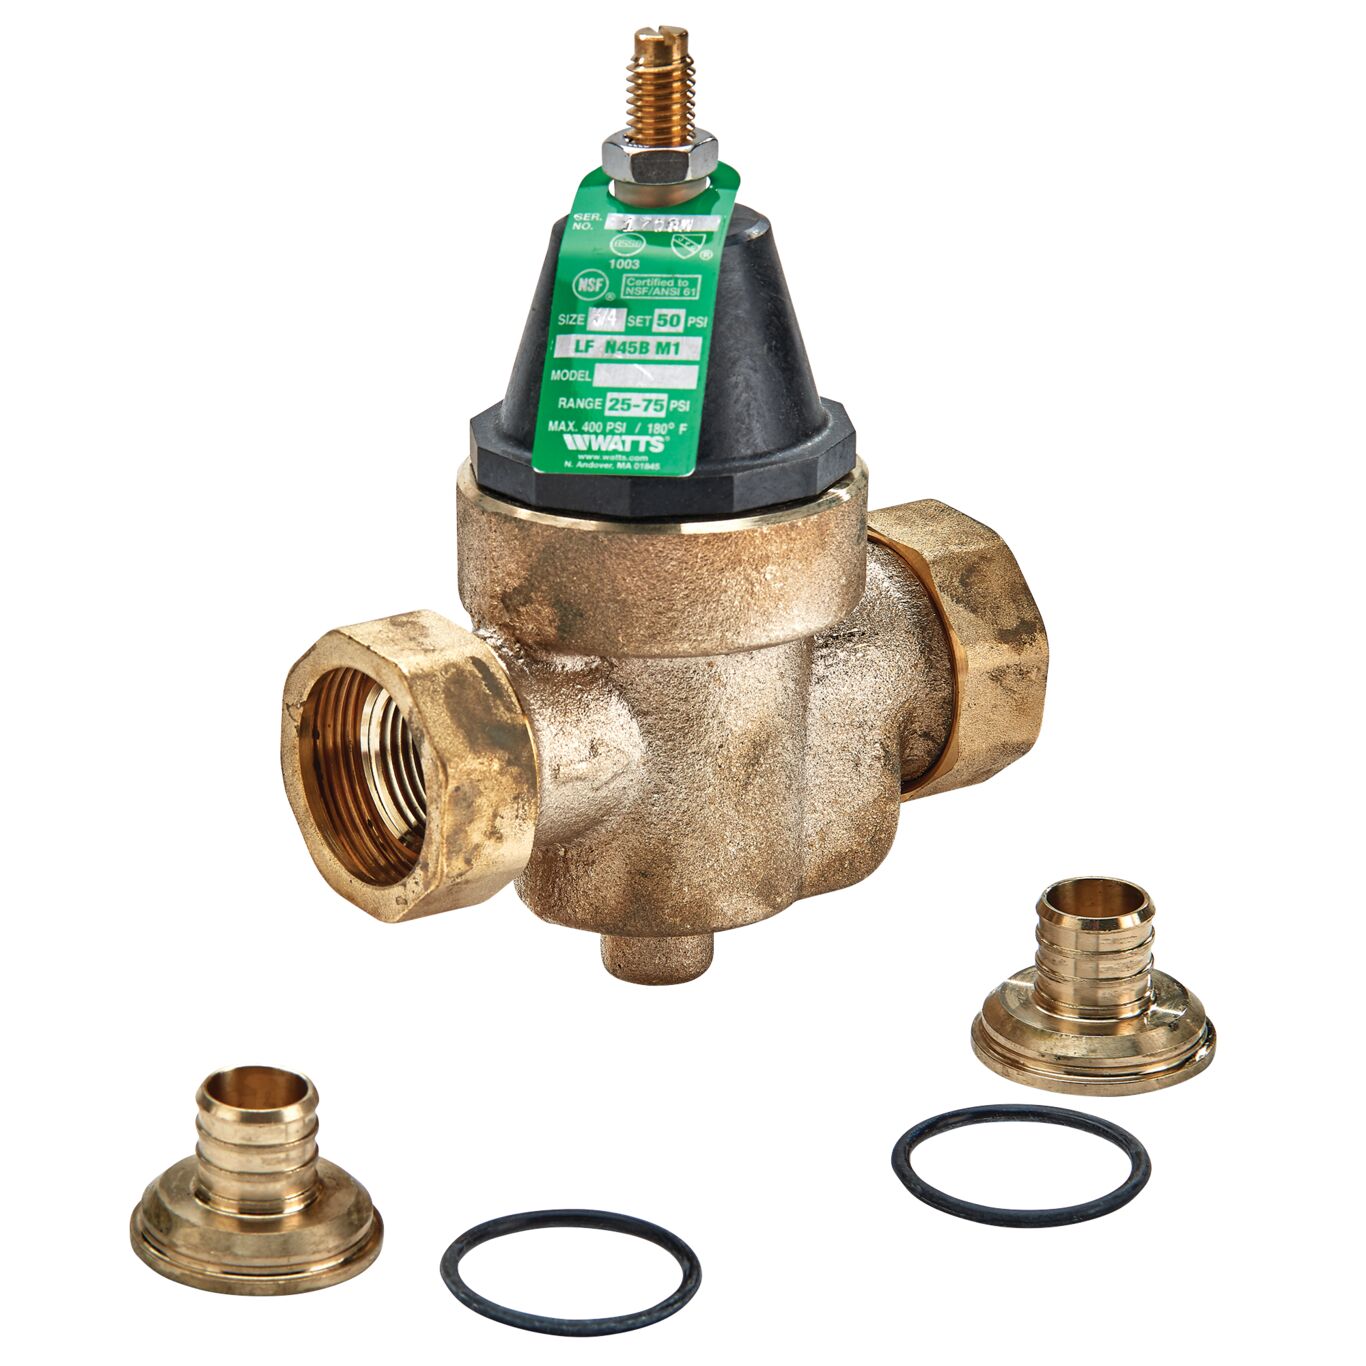 Product Image Lead Free Water Pressure Reducing Valve, Double Union